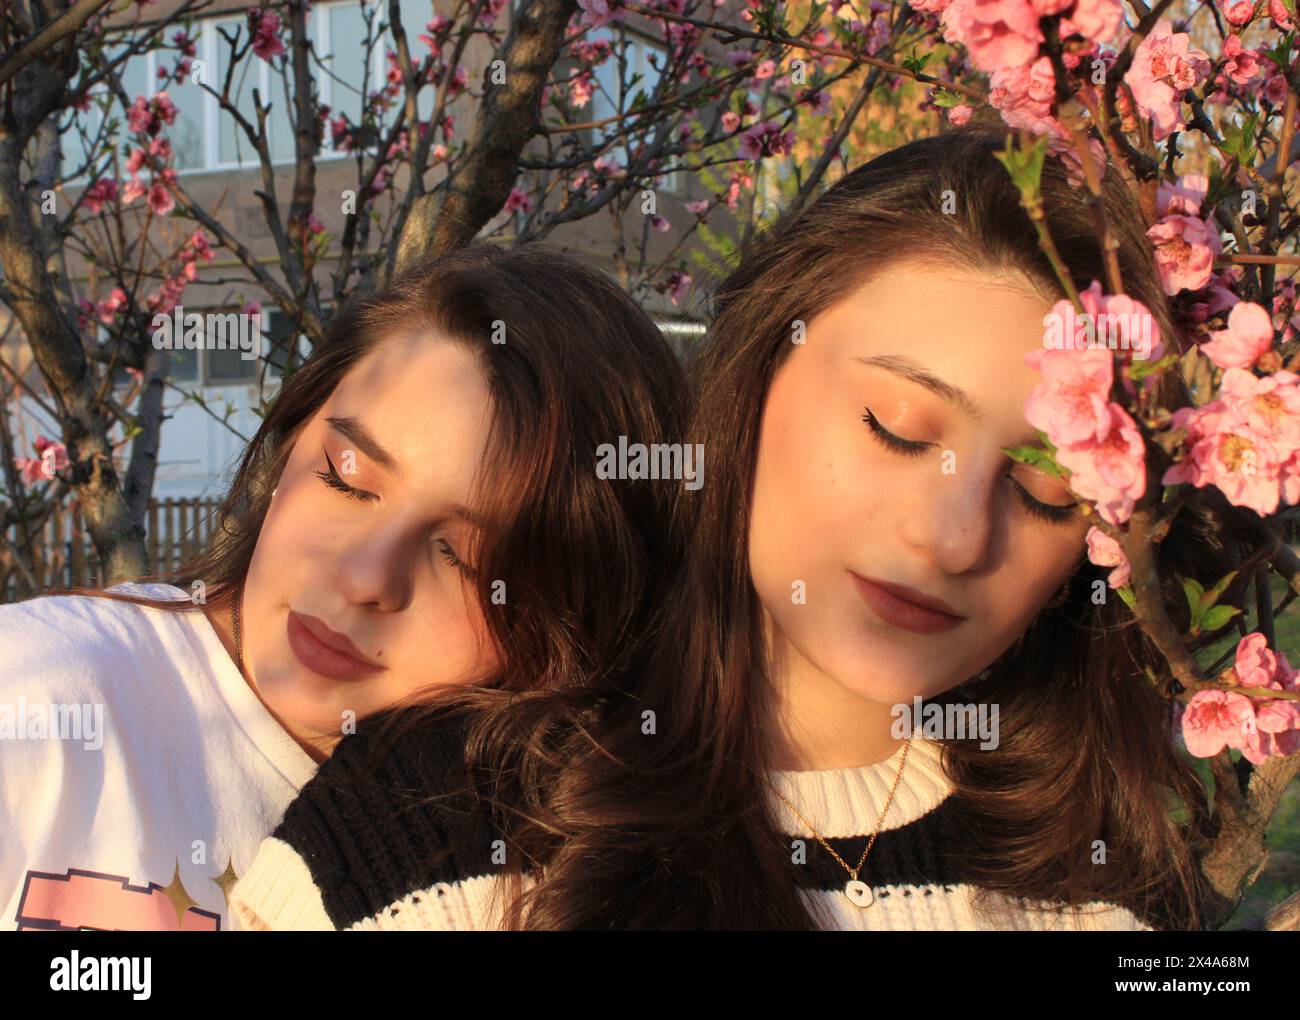 Spring sunny image of 2 girls posing with blossom tree Stock Photo